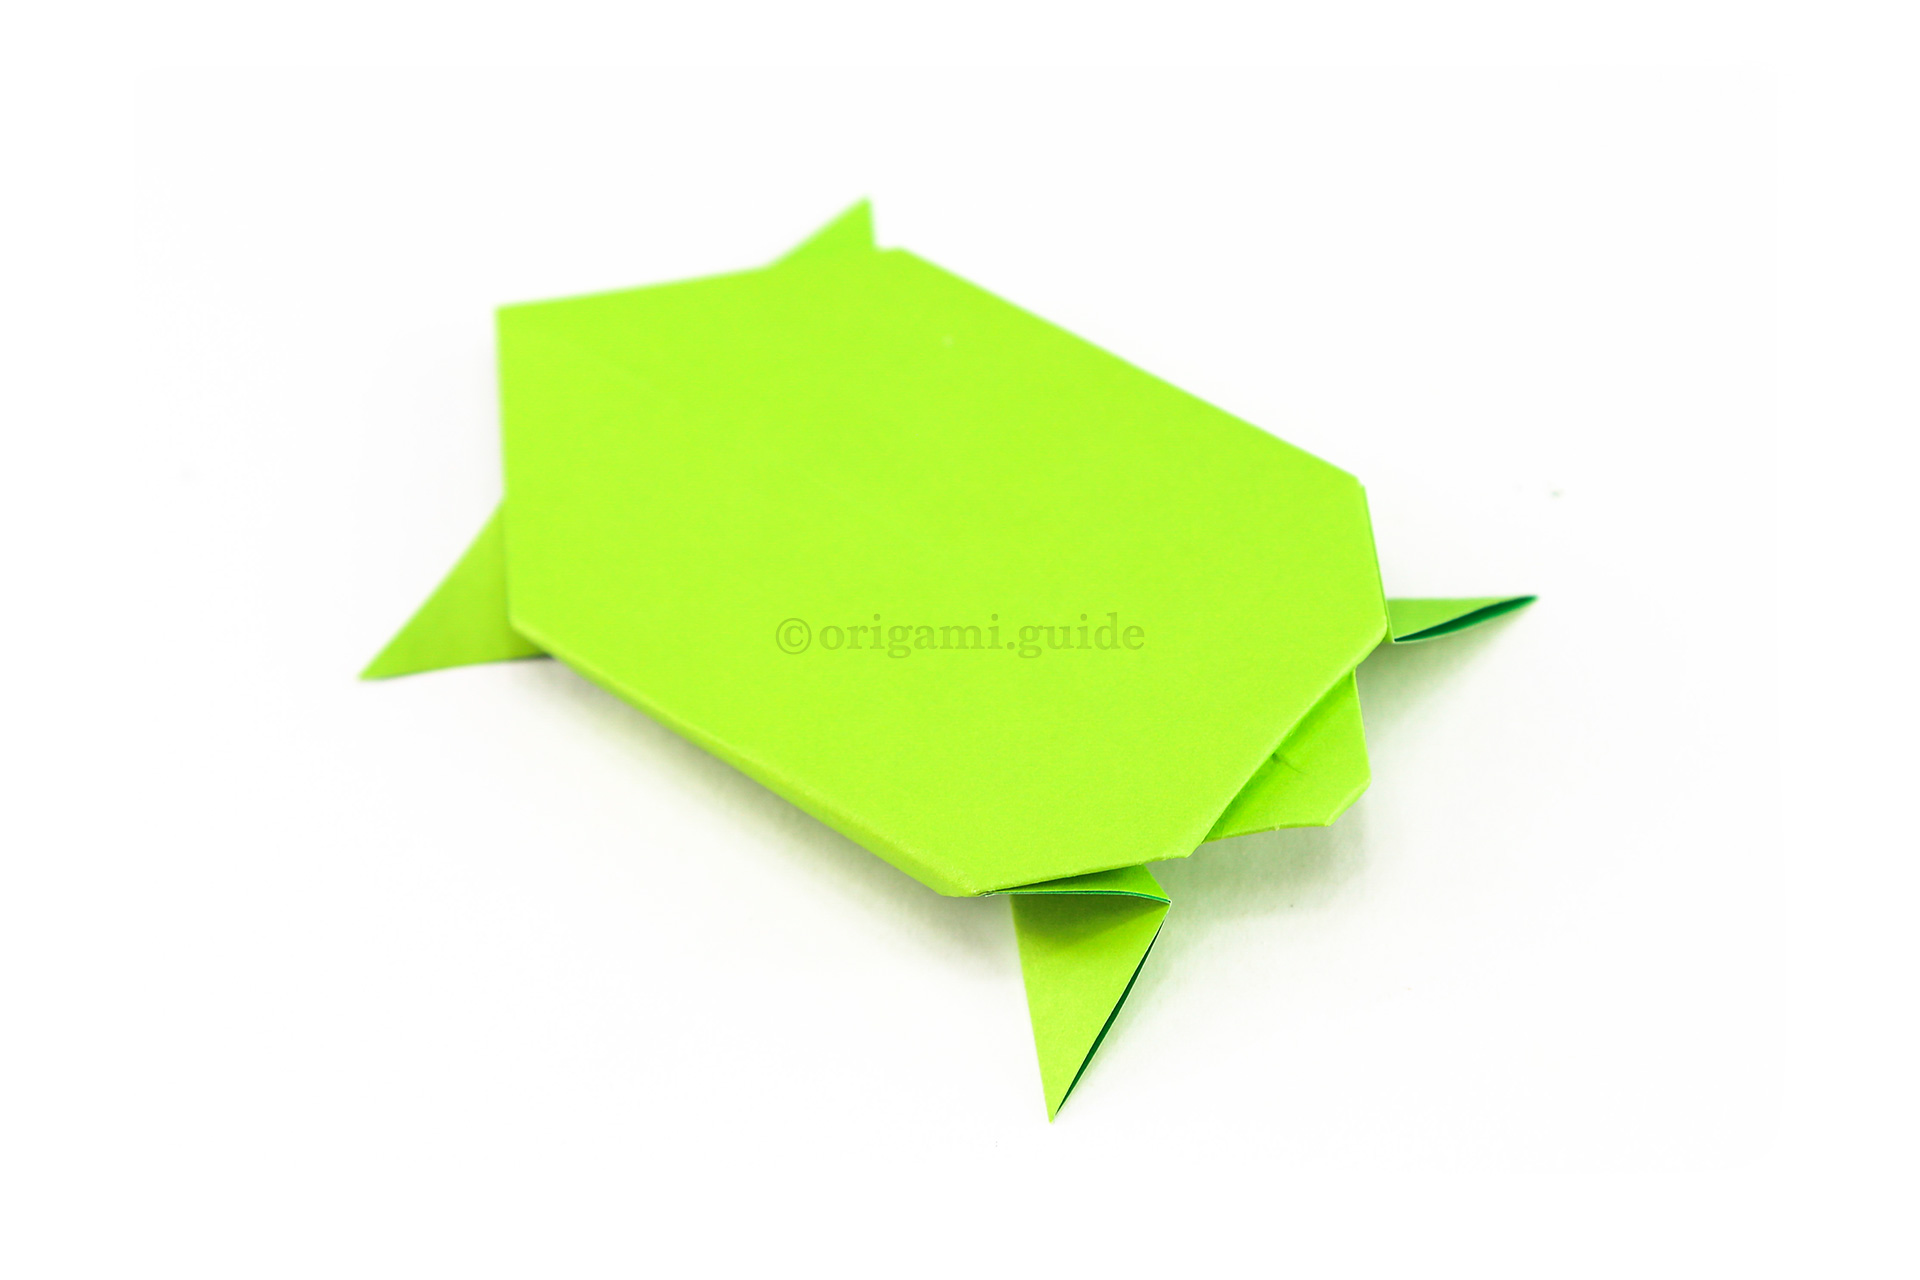 Flip the origami turtle over to the other side and adjust the legs however you like. You could draw a little face on the turtle as well.